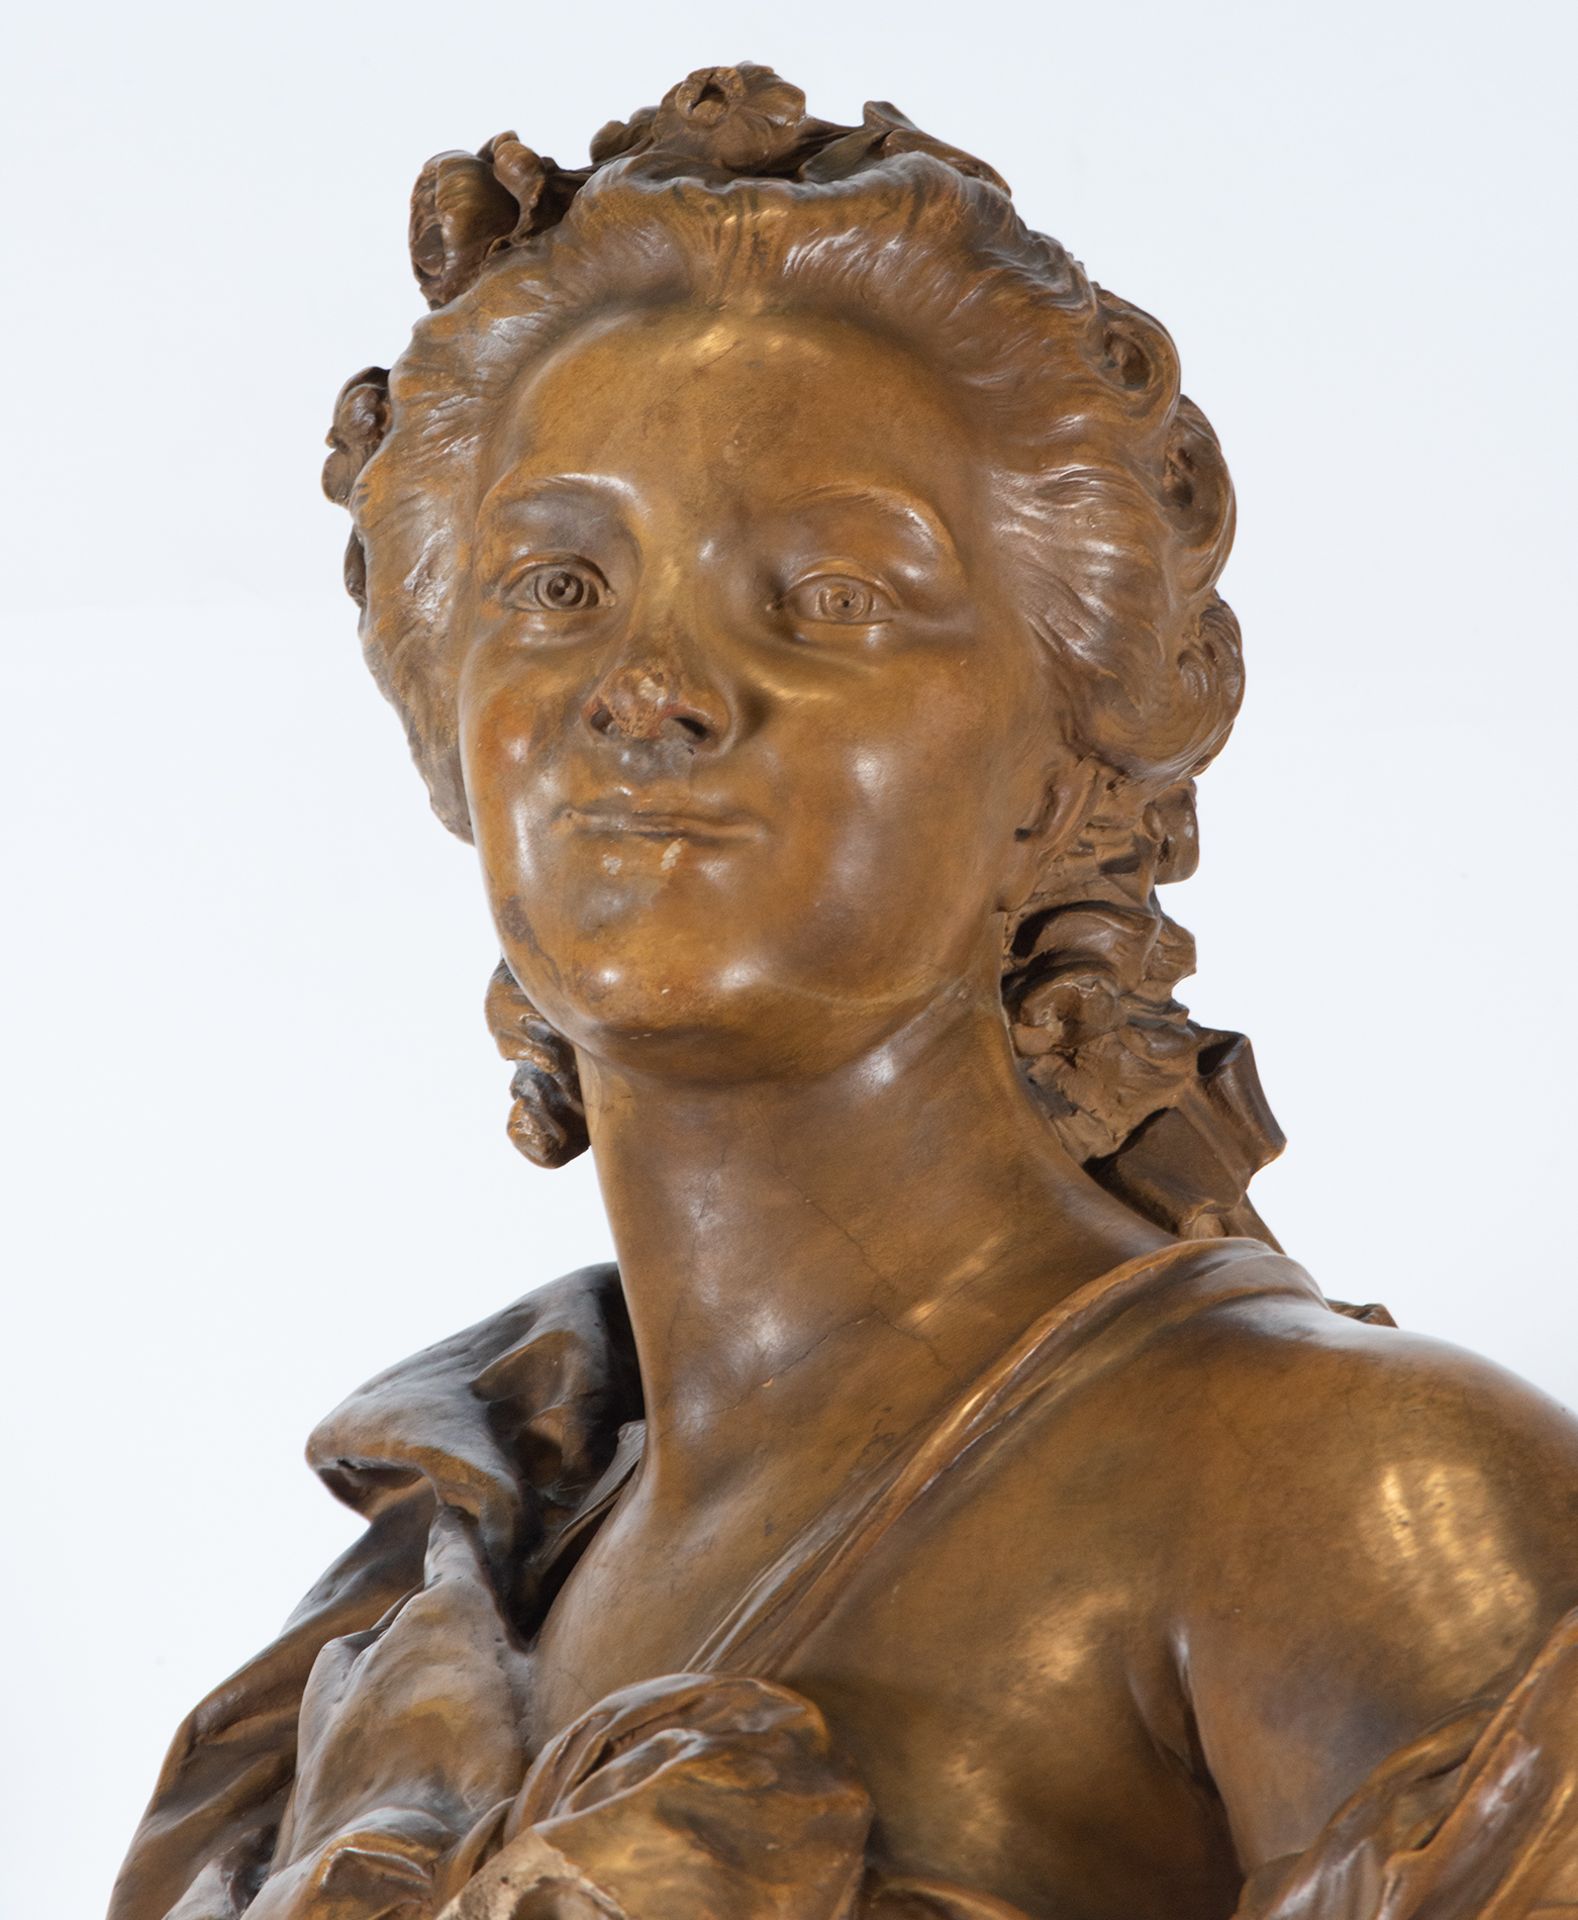 Large Bust of French Noble Lady in Terracotta, France, 18th century - Image 3 of 6